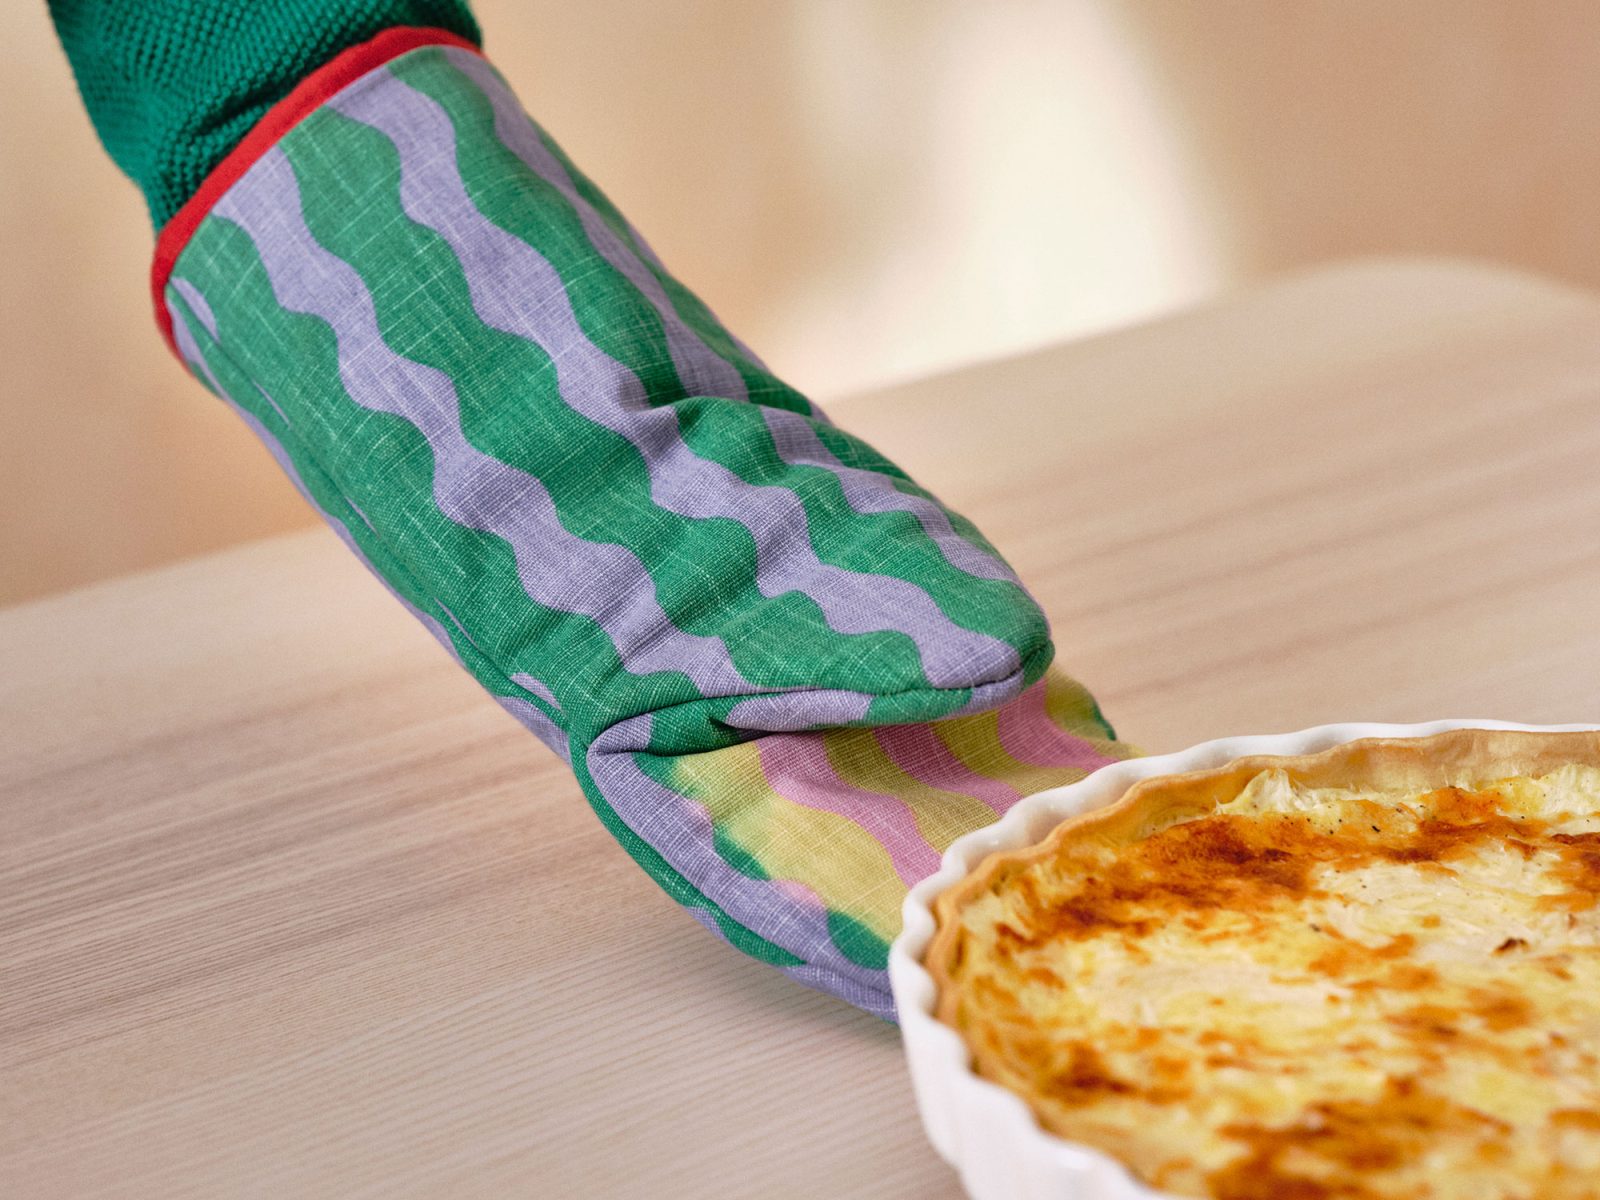 Person wearing green-blue-red oven glove moves to lift a hot pie dish.